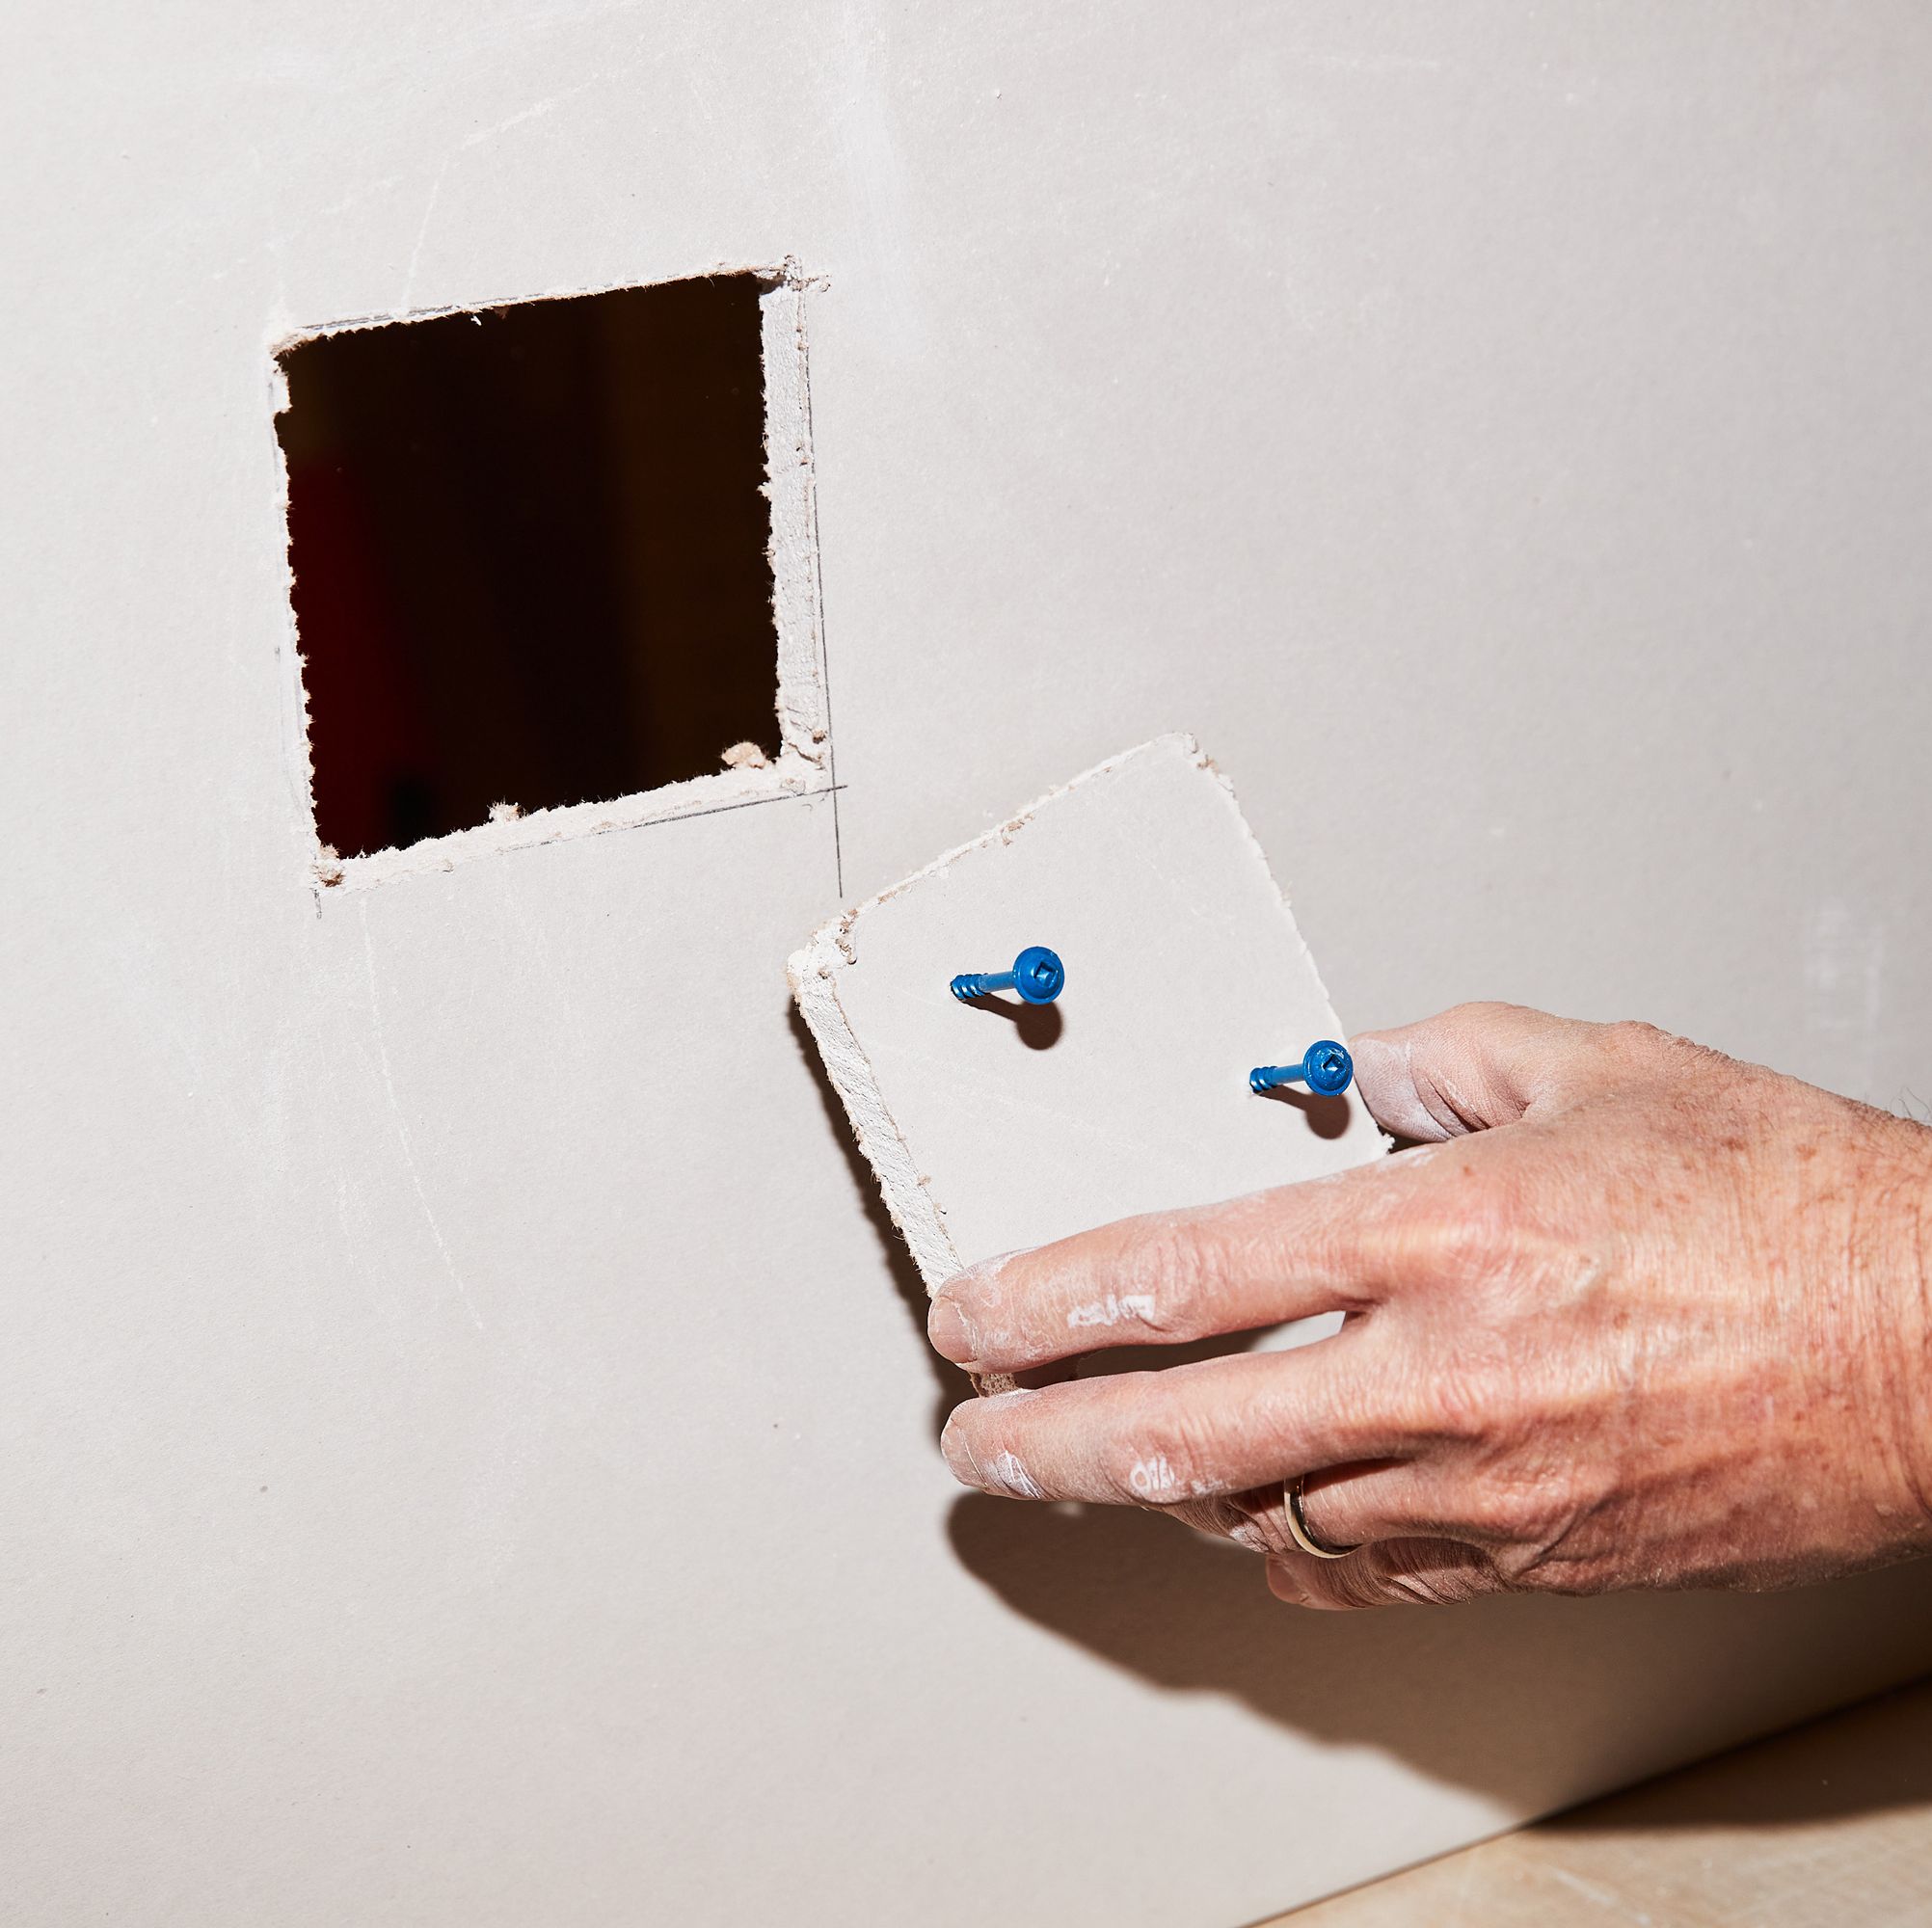 Our Tried-and-True Drywall Repair Hacks For Getting the Job Done Quickly and Easily